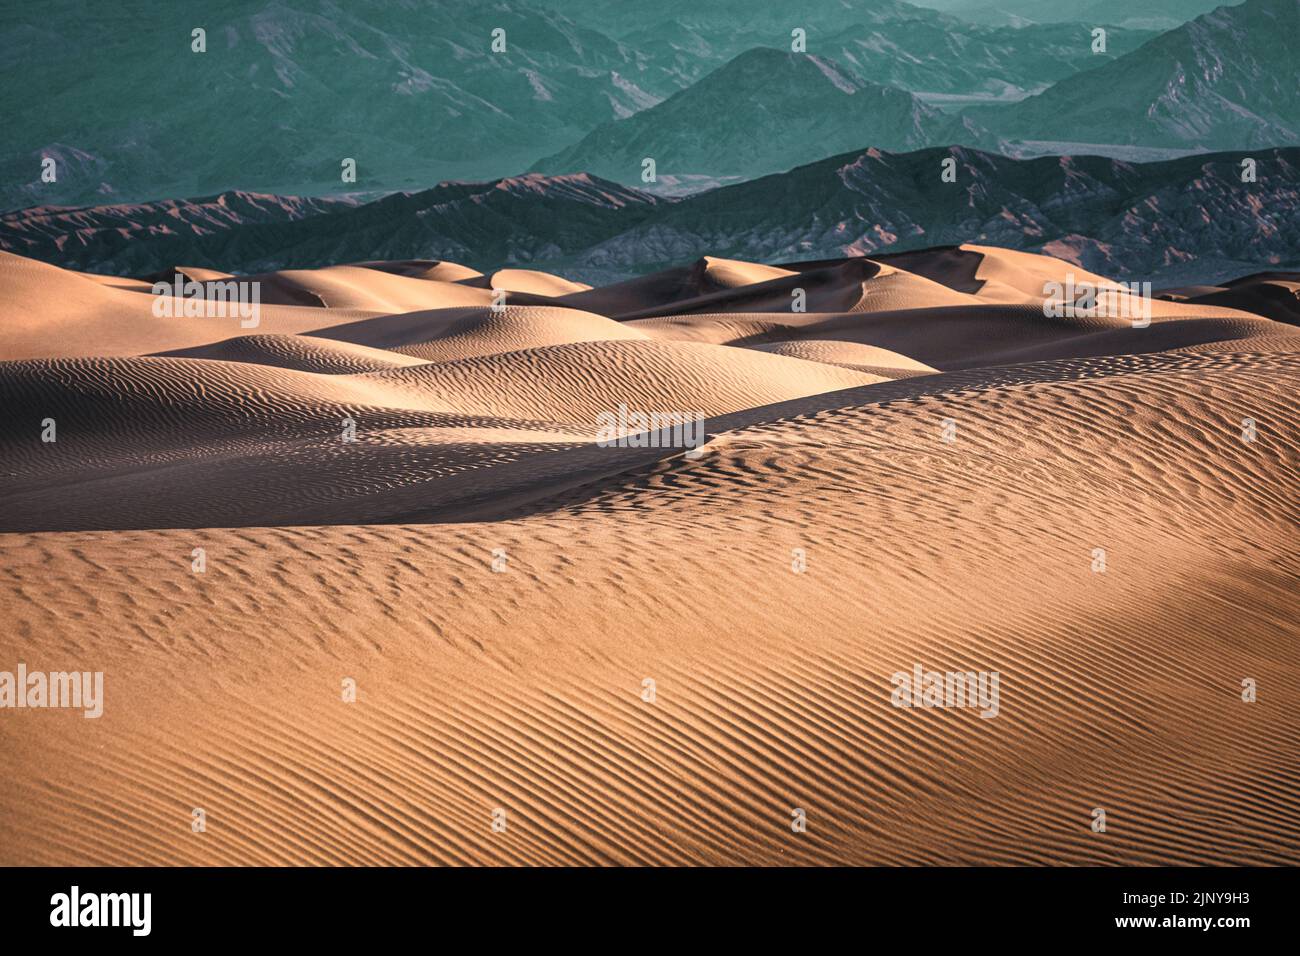 Mesquite Flat Sand Dunes stretch across the valley floor in Death Valley National Park, California. Stock Photo